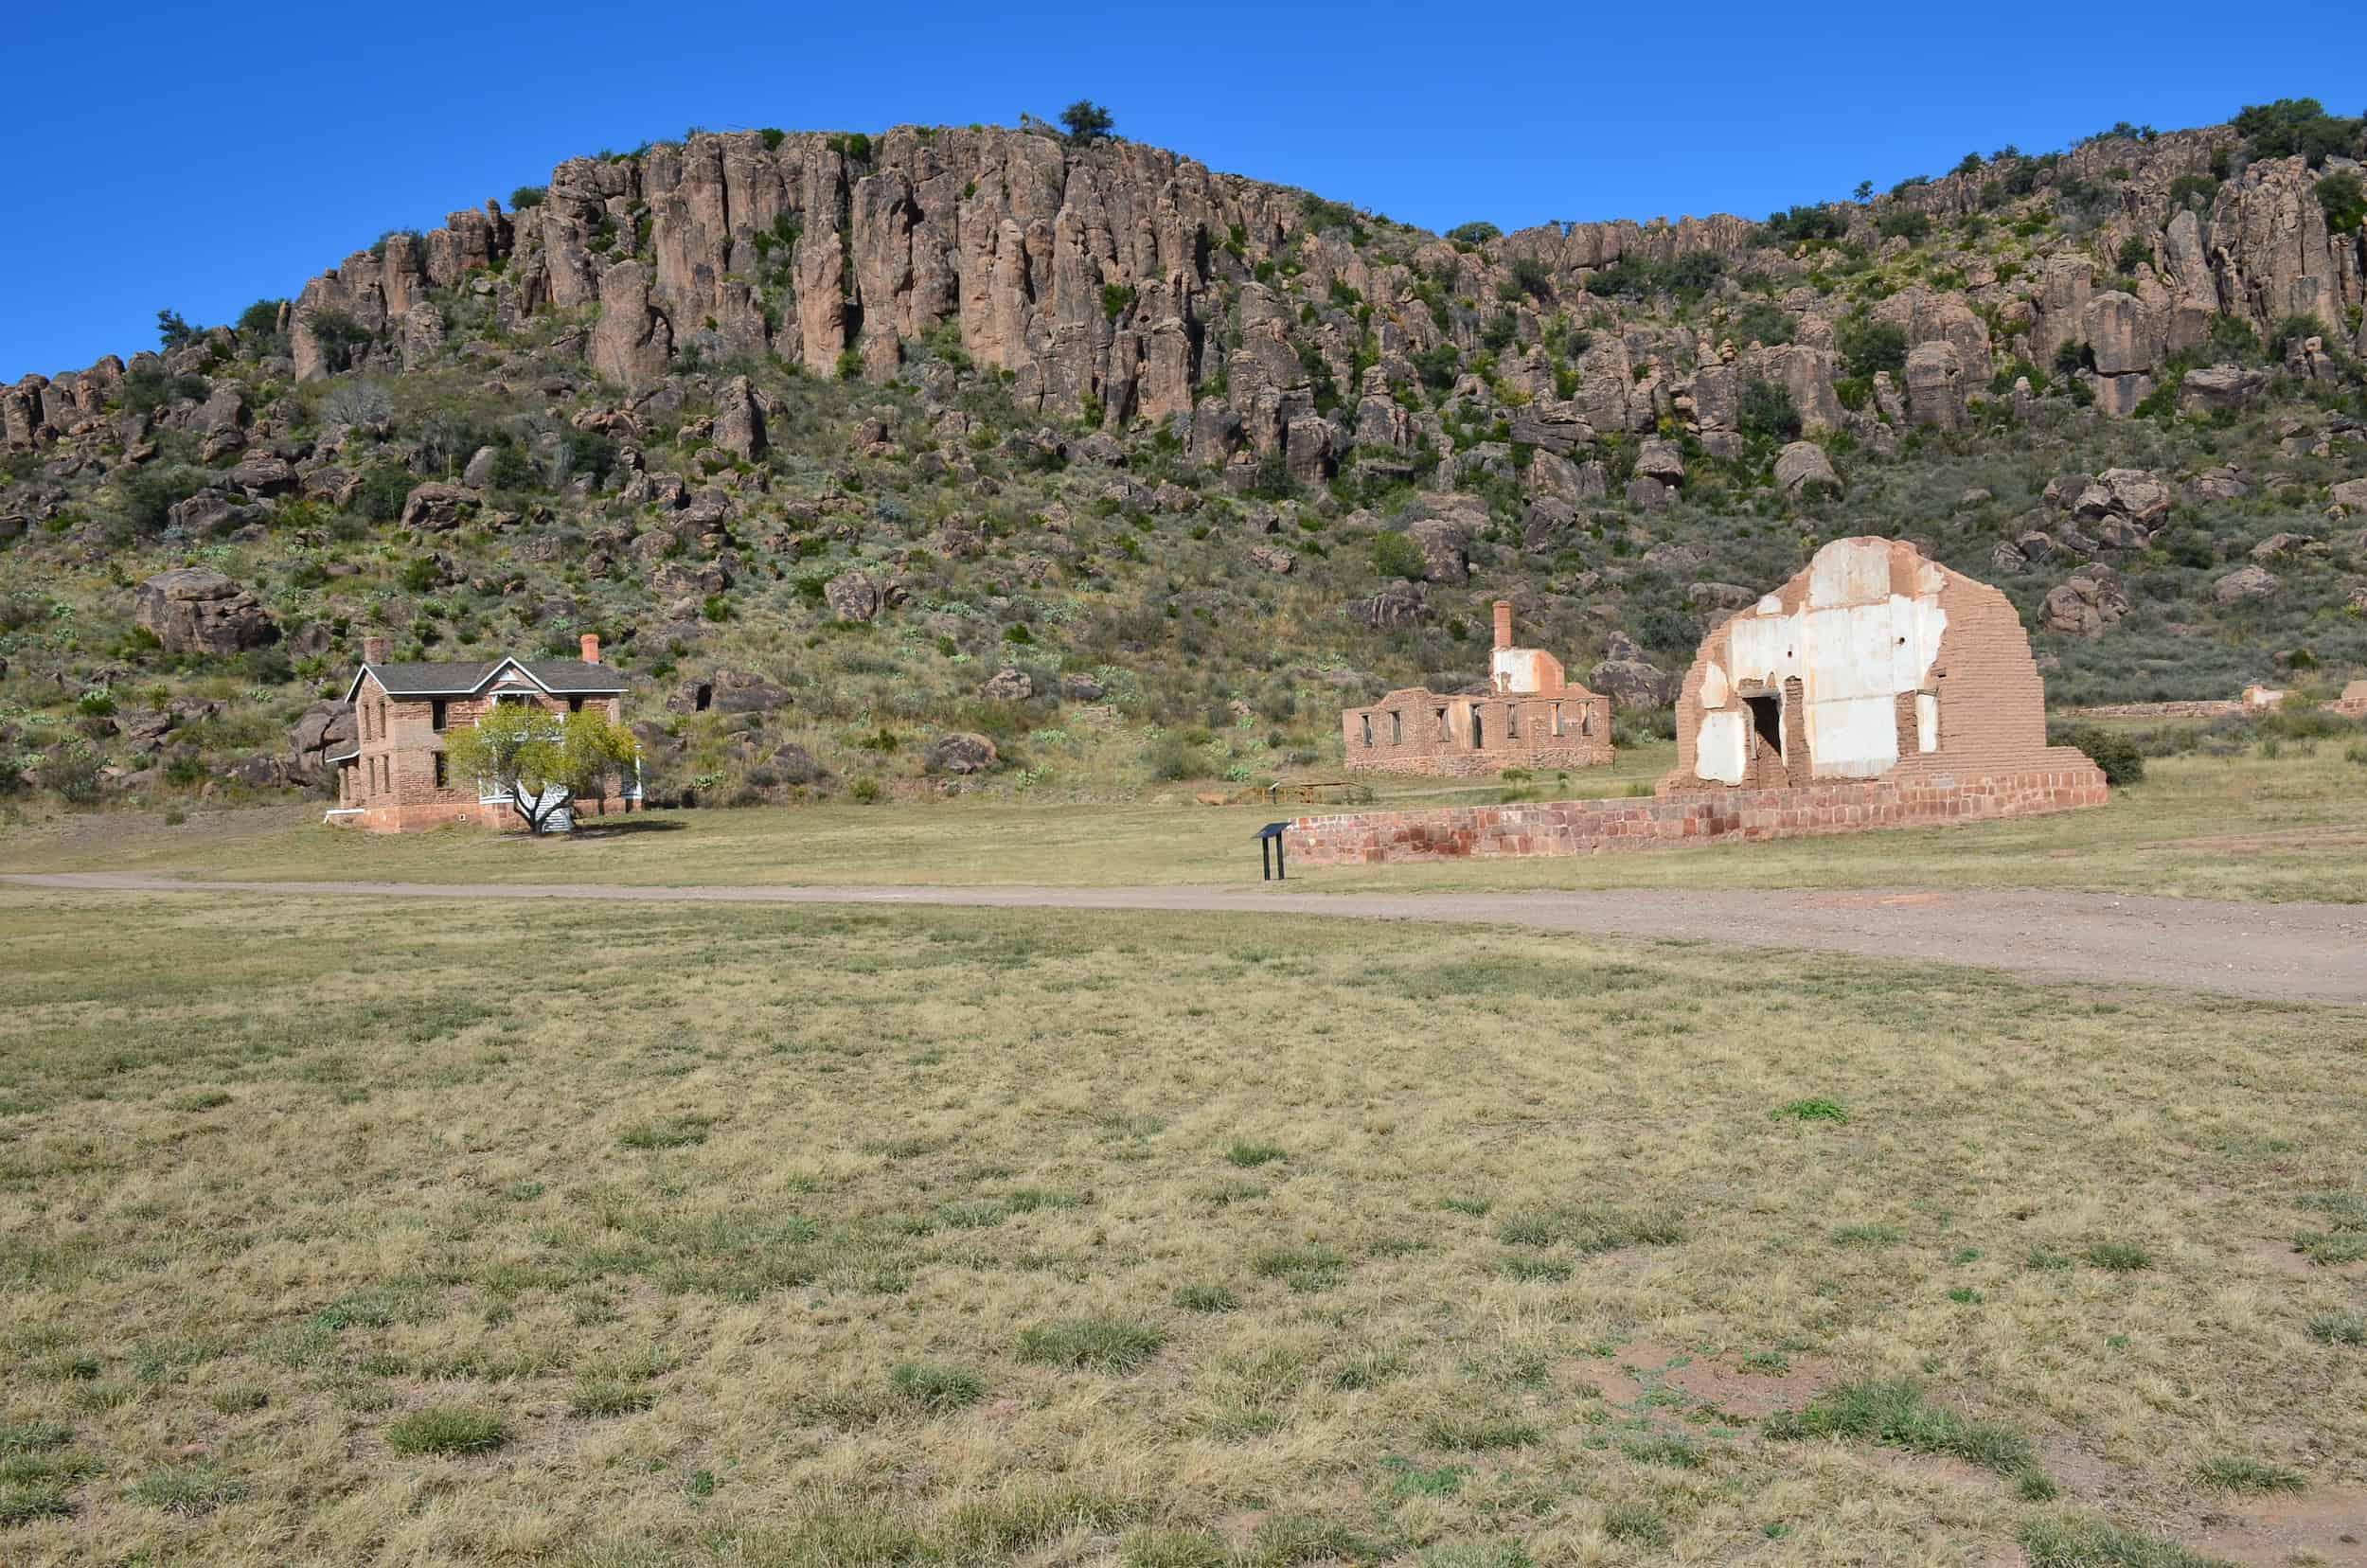 Fort Davis National Historic Site in Texas